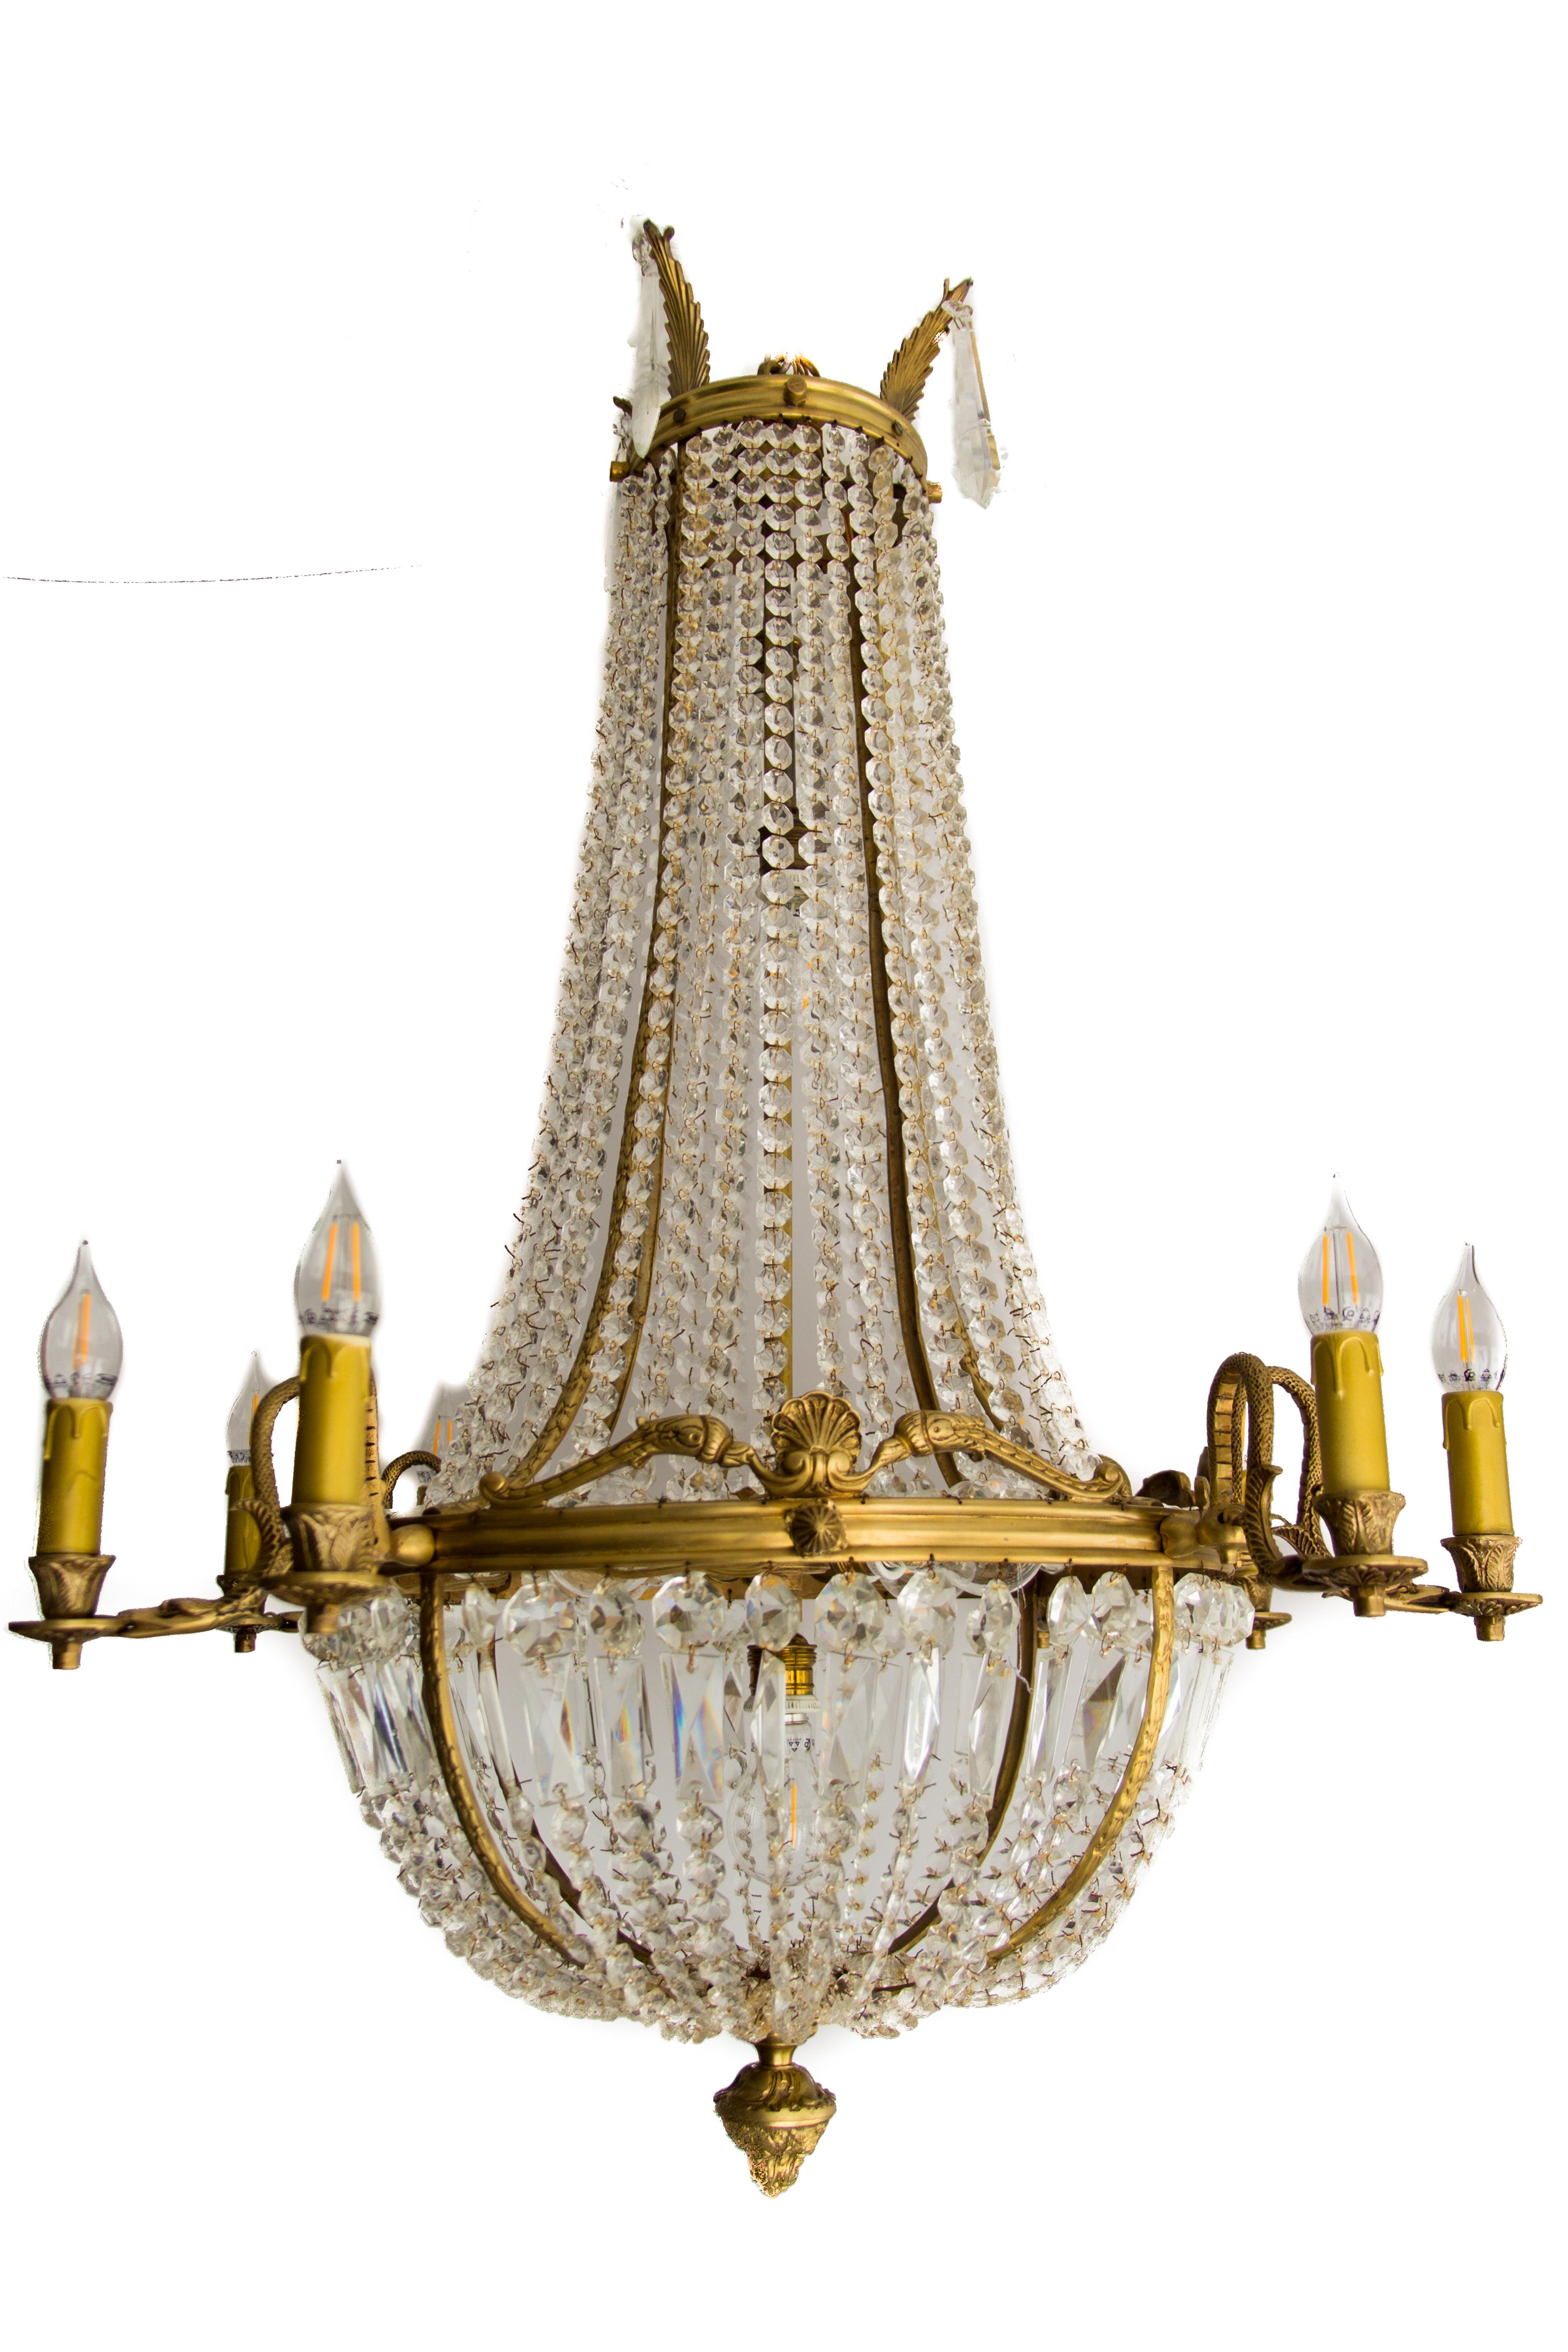 Each impressive fifteen-lights basket chandelier has ten bronze arms shaped as stylized swan heads holding perimeter lights with E14 sockets. Five interior tiered lights with E27 sockets. The crown is decorated with bronze plumes and crystal